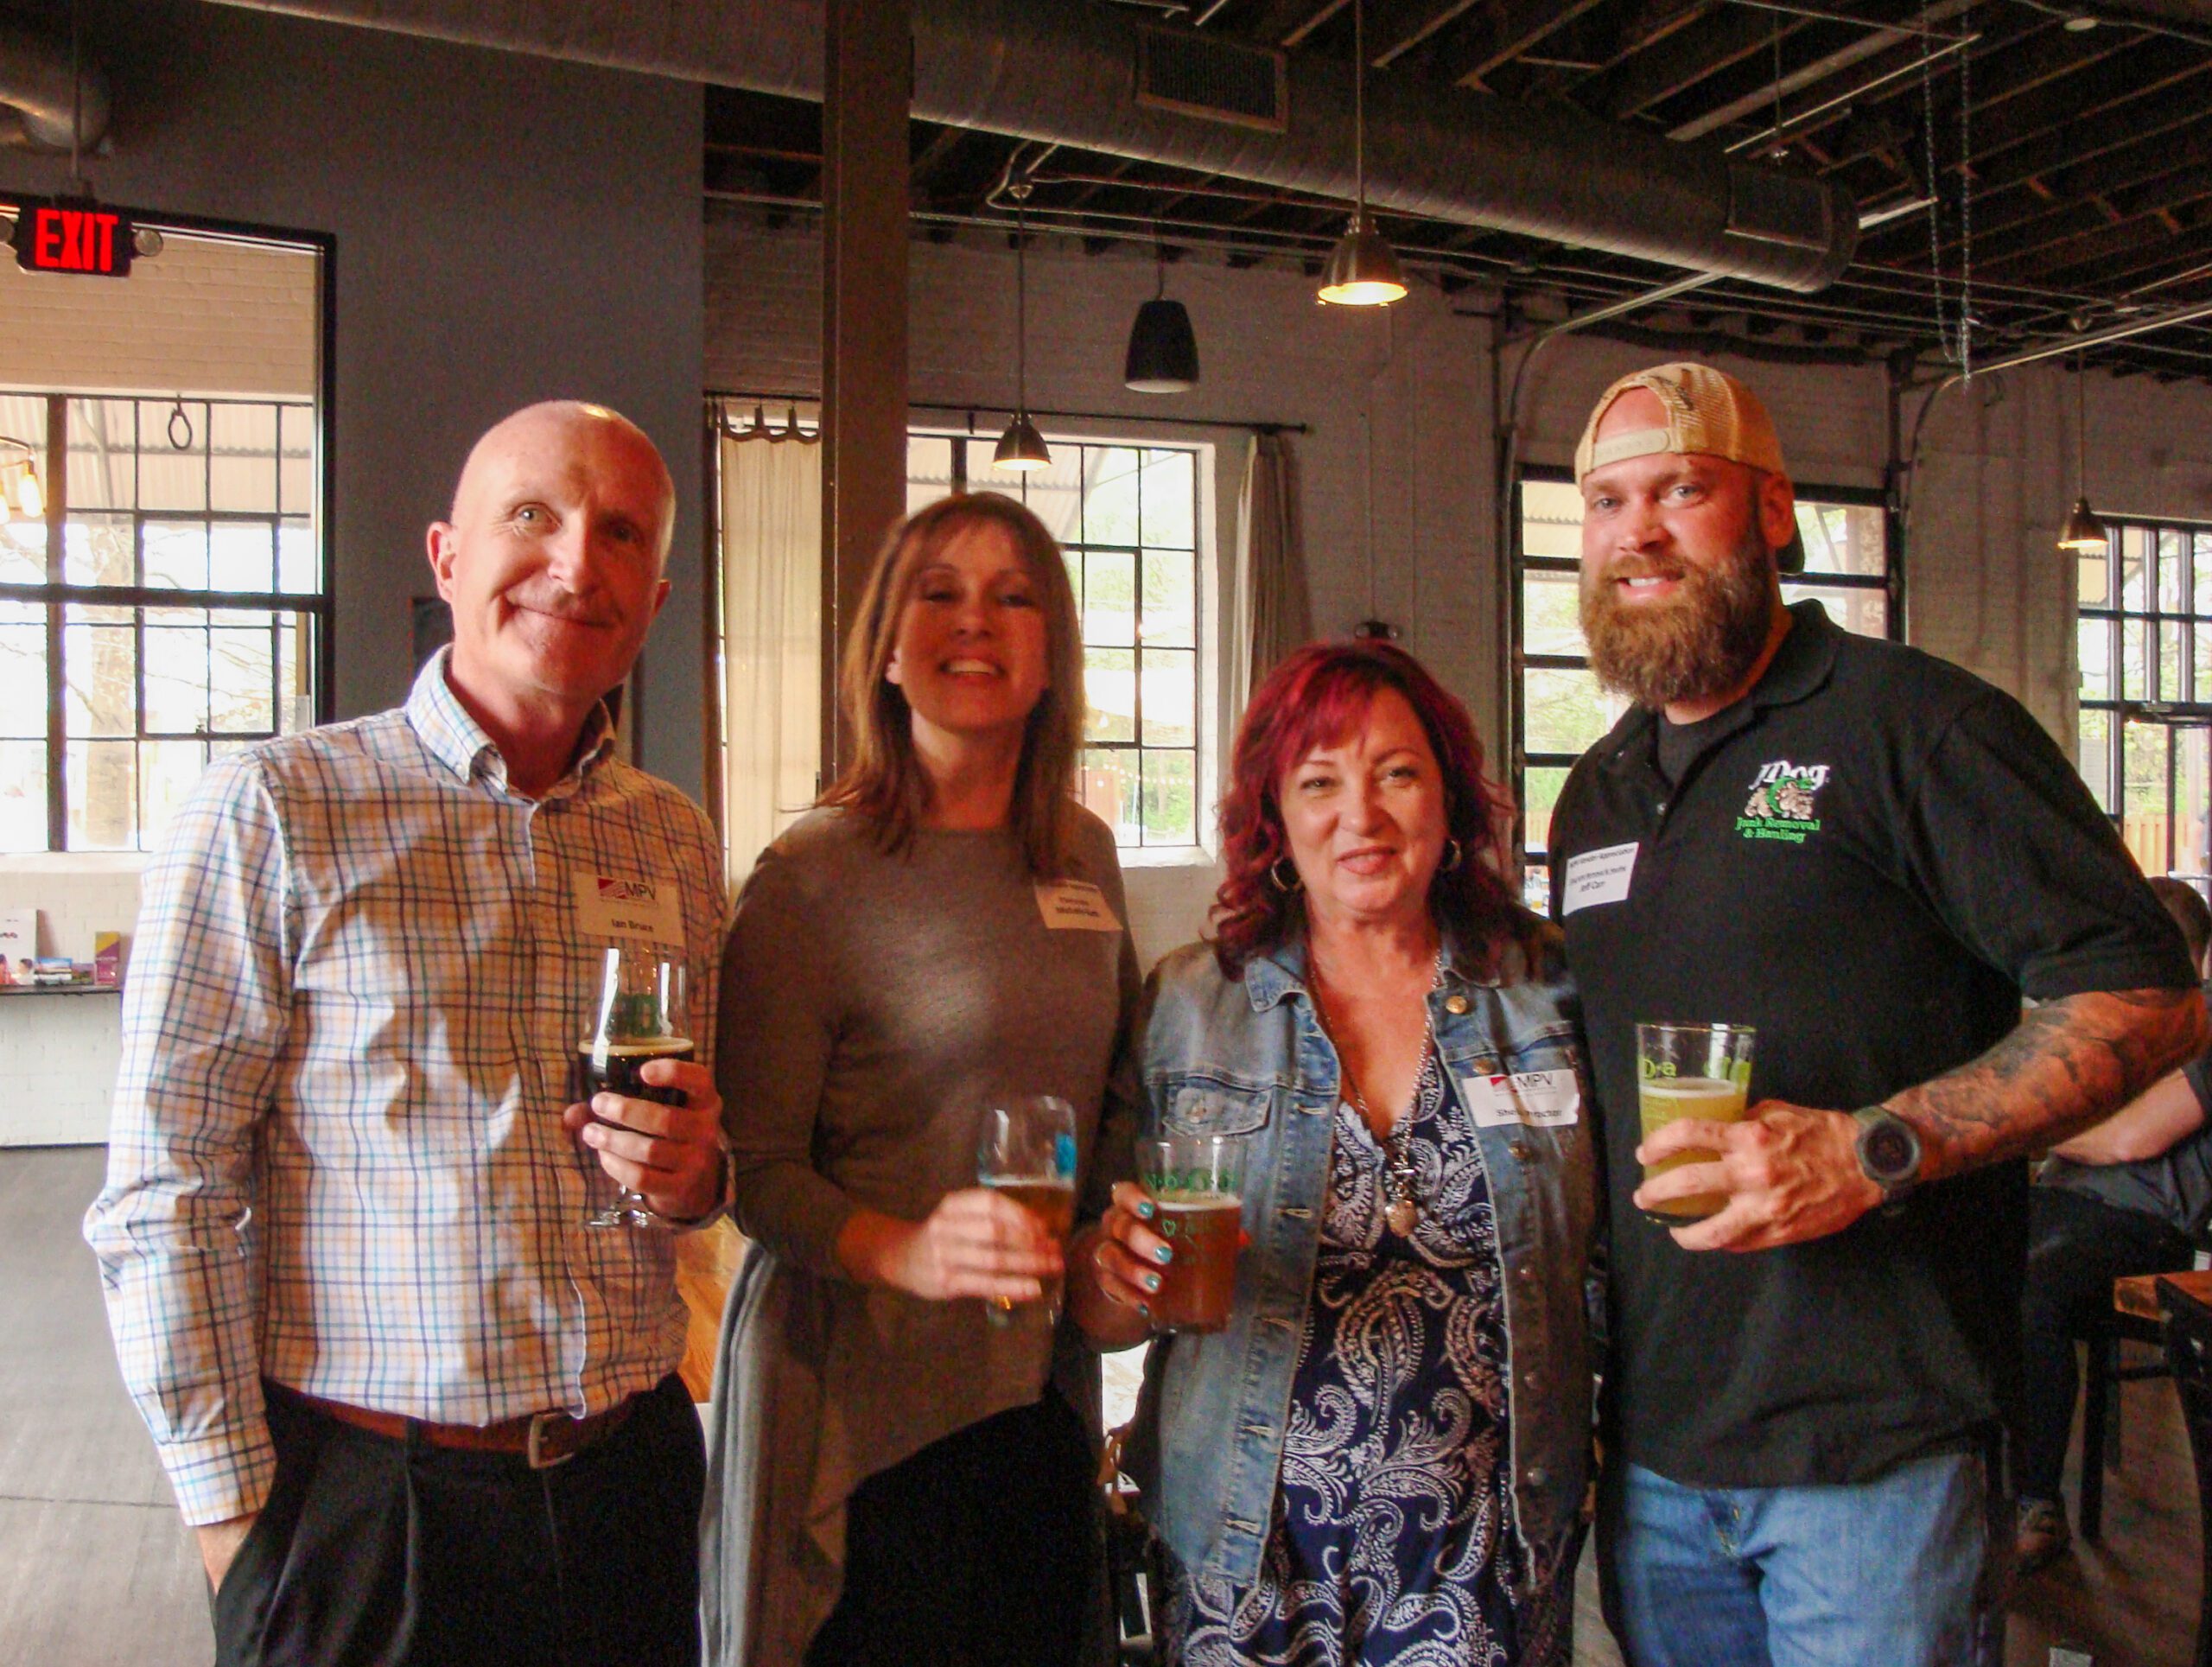 MPV Association Management team and vendors at NoDa Brewery four adults smiling